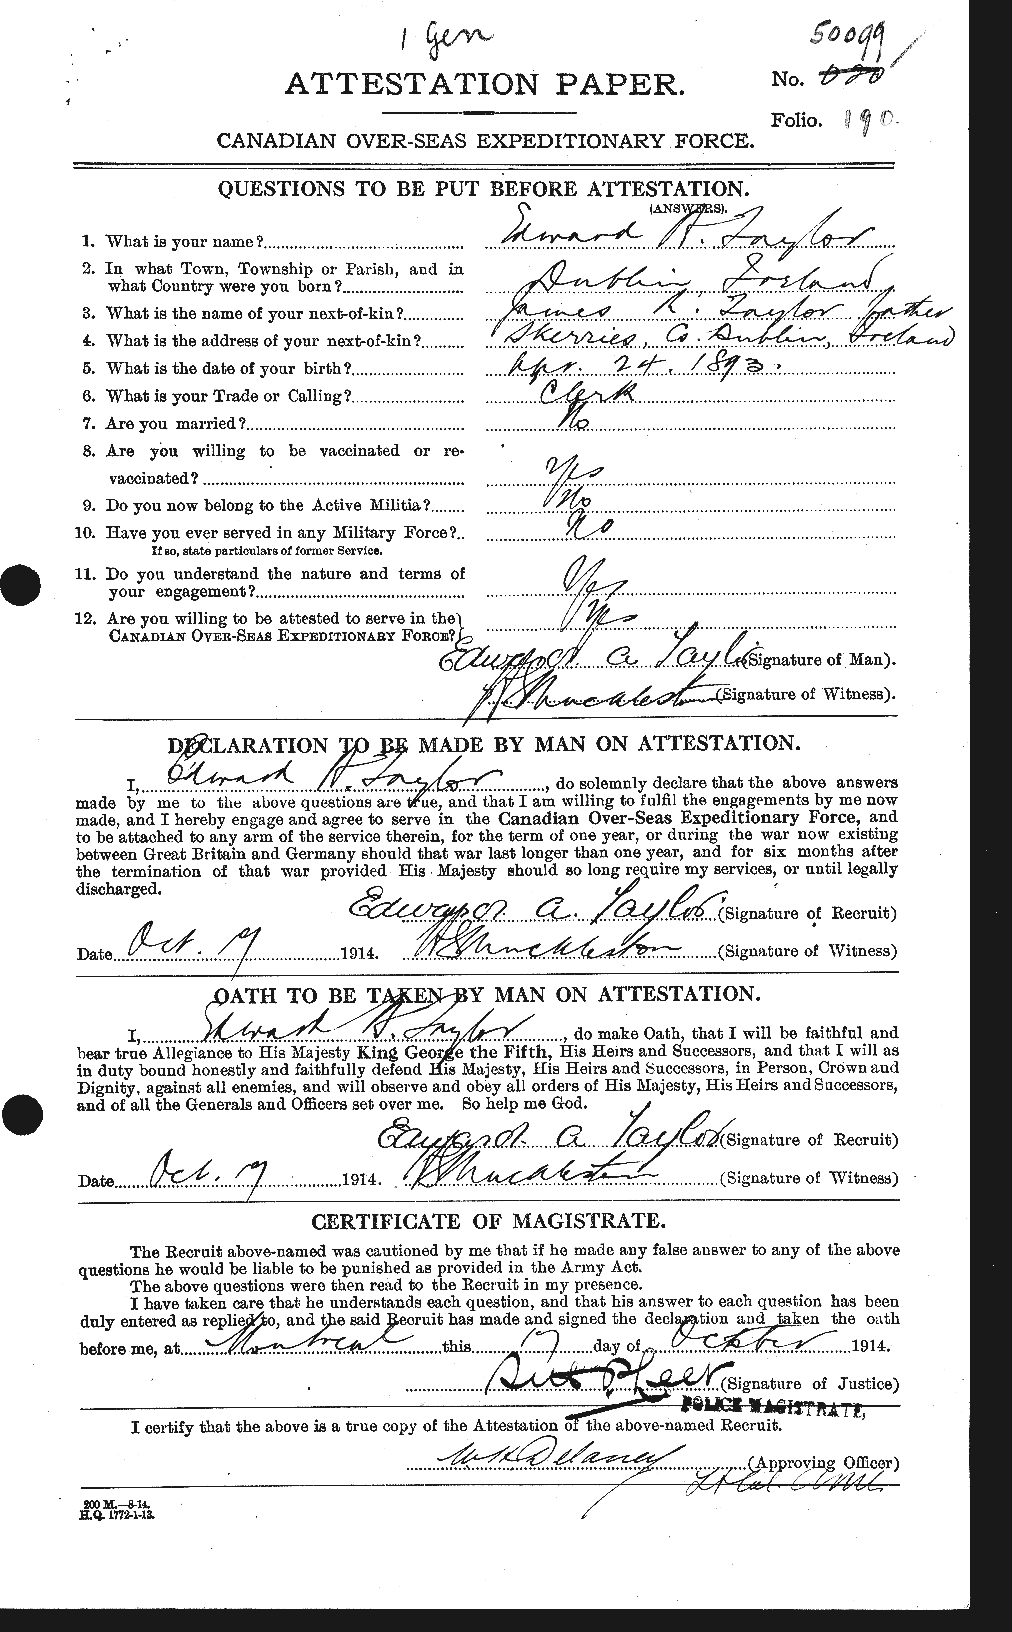 Personnel Records of the First World War - CEF 627297a